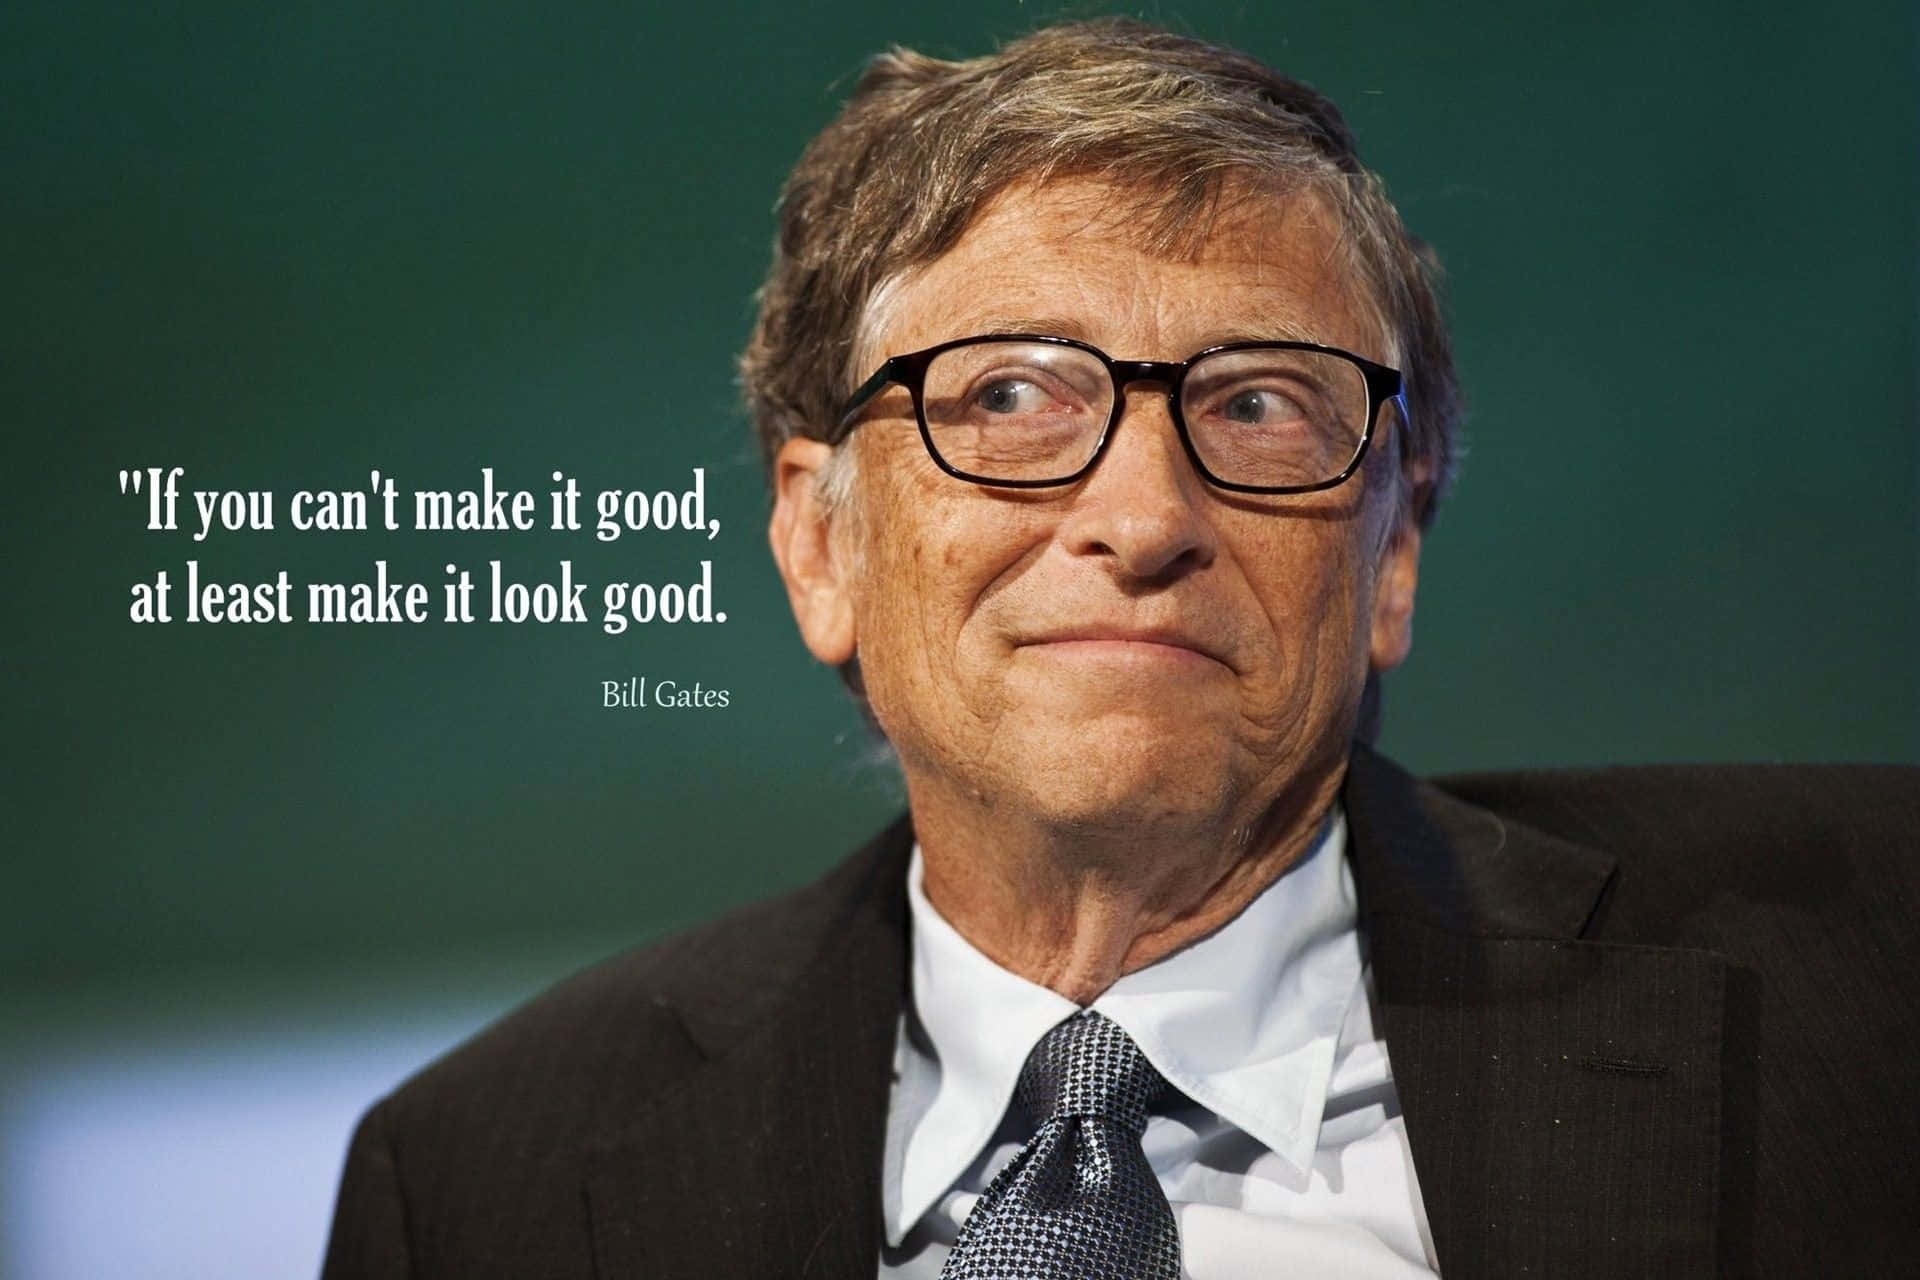 Bill Gates, Microsoft Founder and Co-Chair of the Giving Pledge